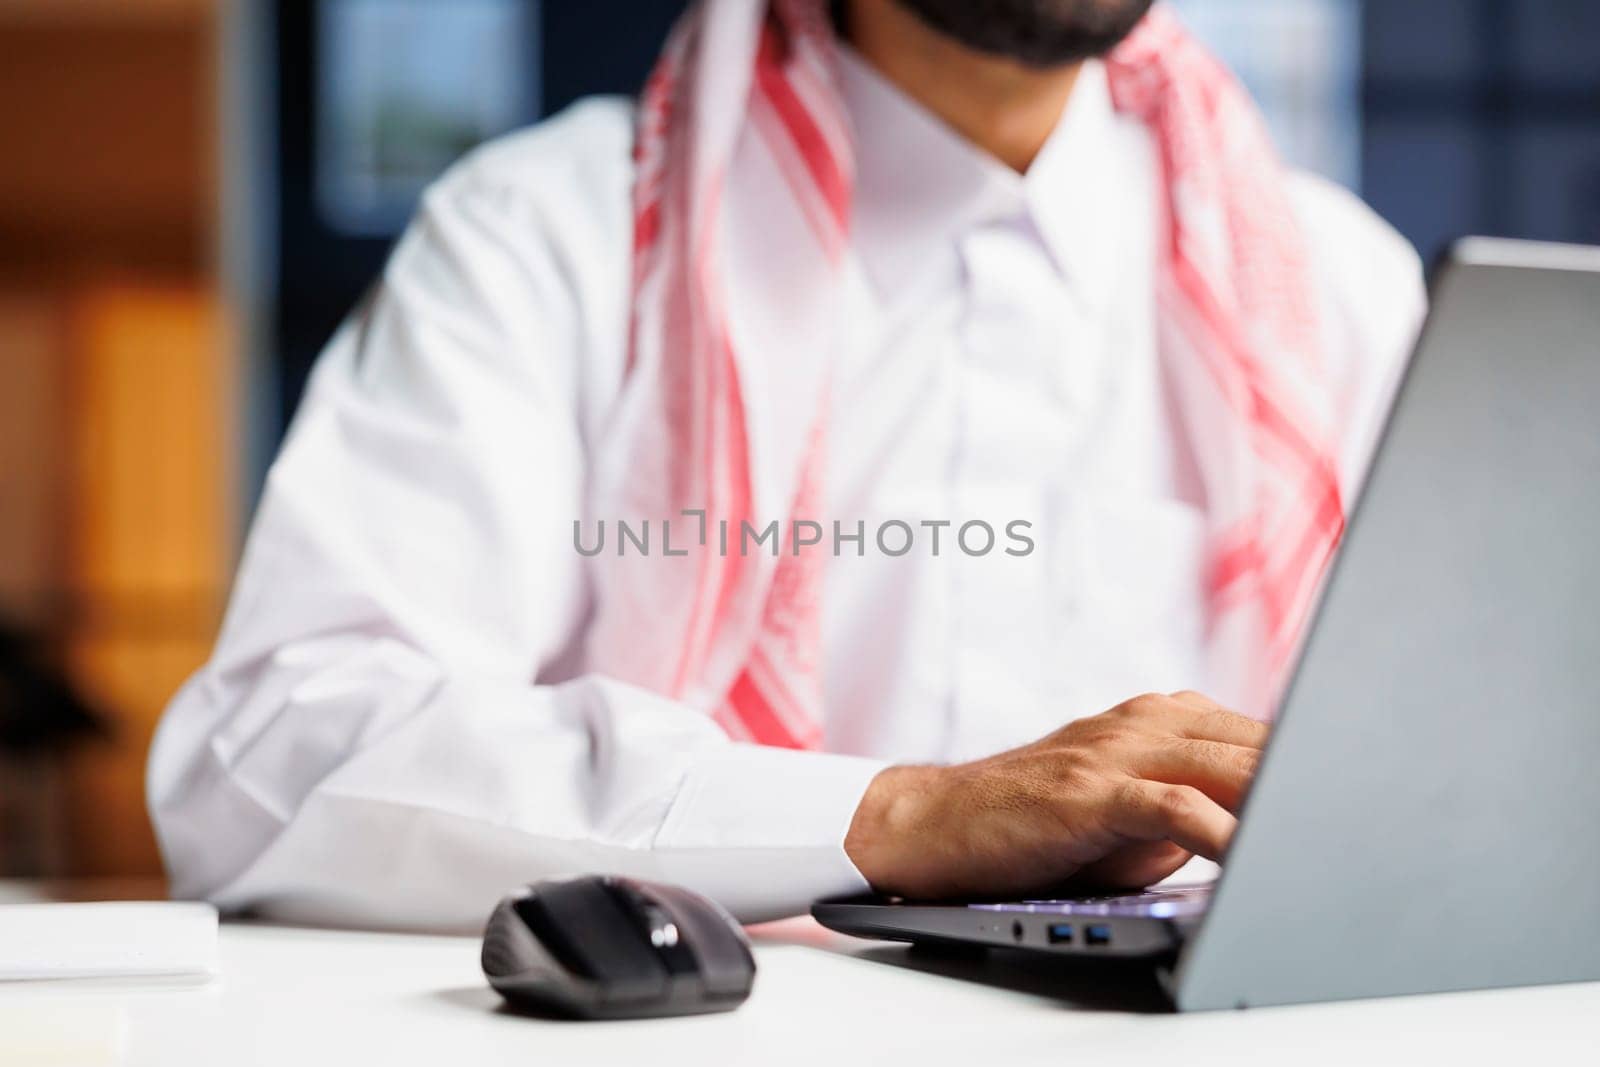 Detailed view of an Arab person utilizing modern technology by typing on a wireless computer. Close-up shot of a digital laptop being used by a young adult in Arabic clothing.